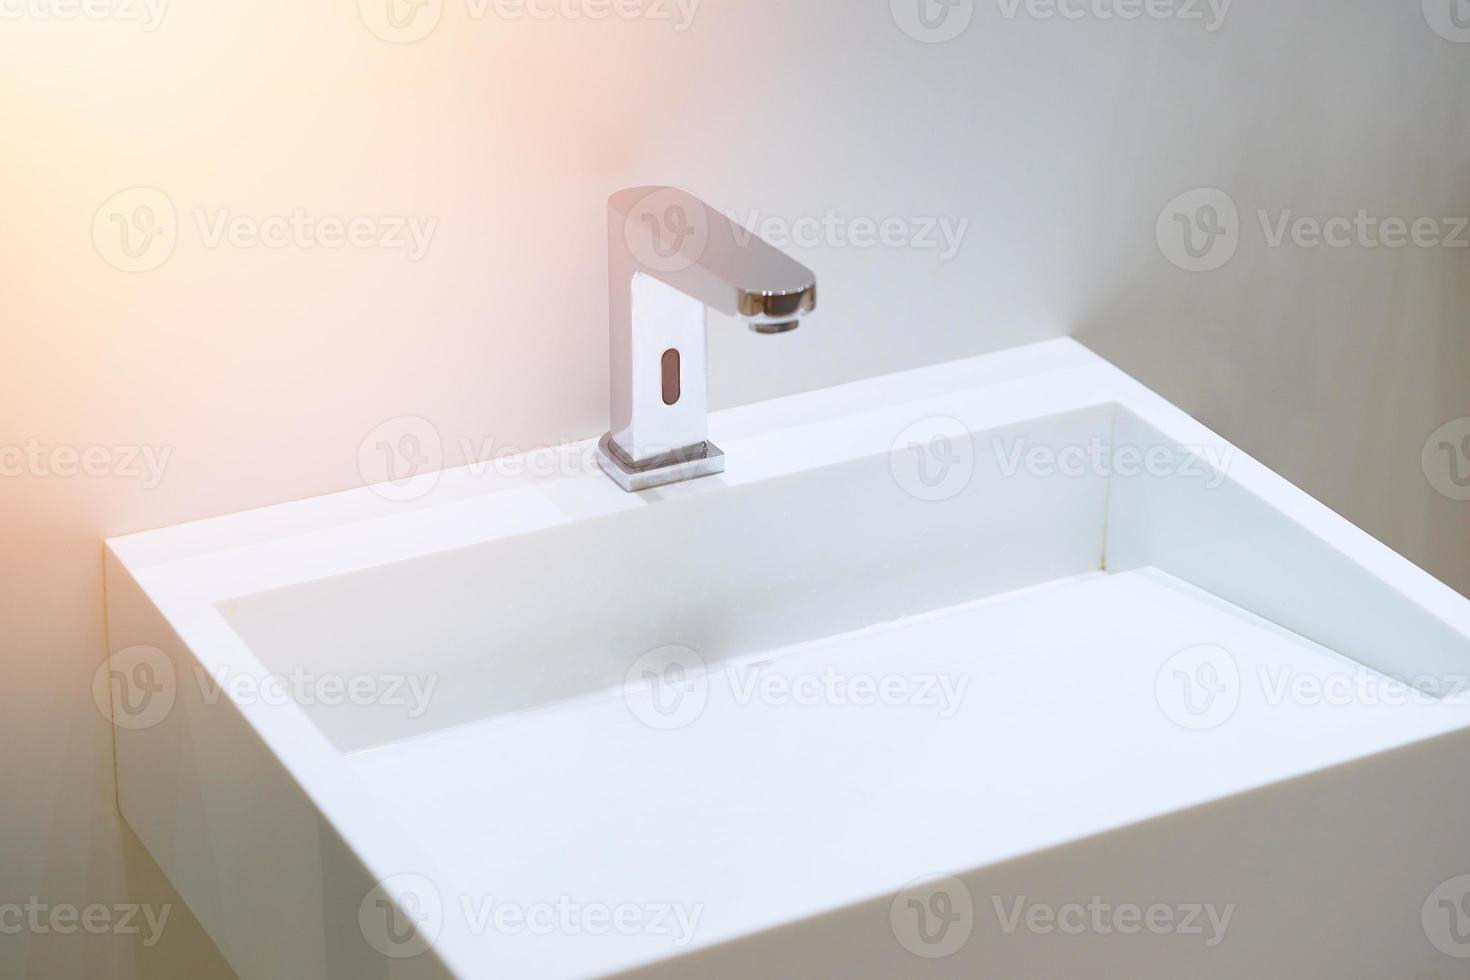 Clean sink with water tap for wash hands or things photo